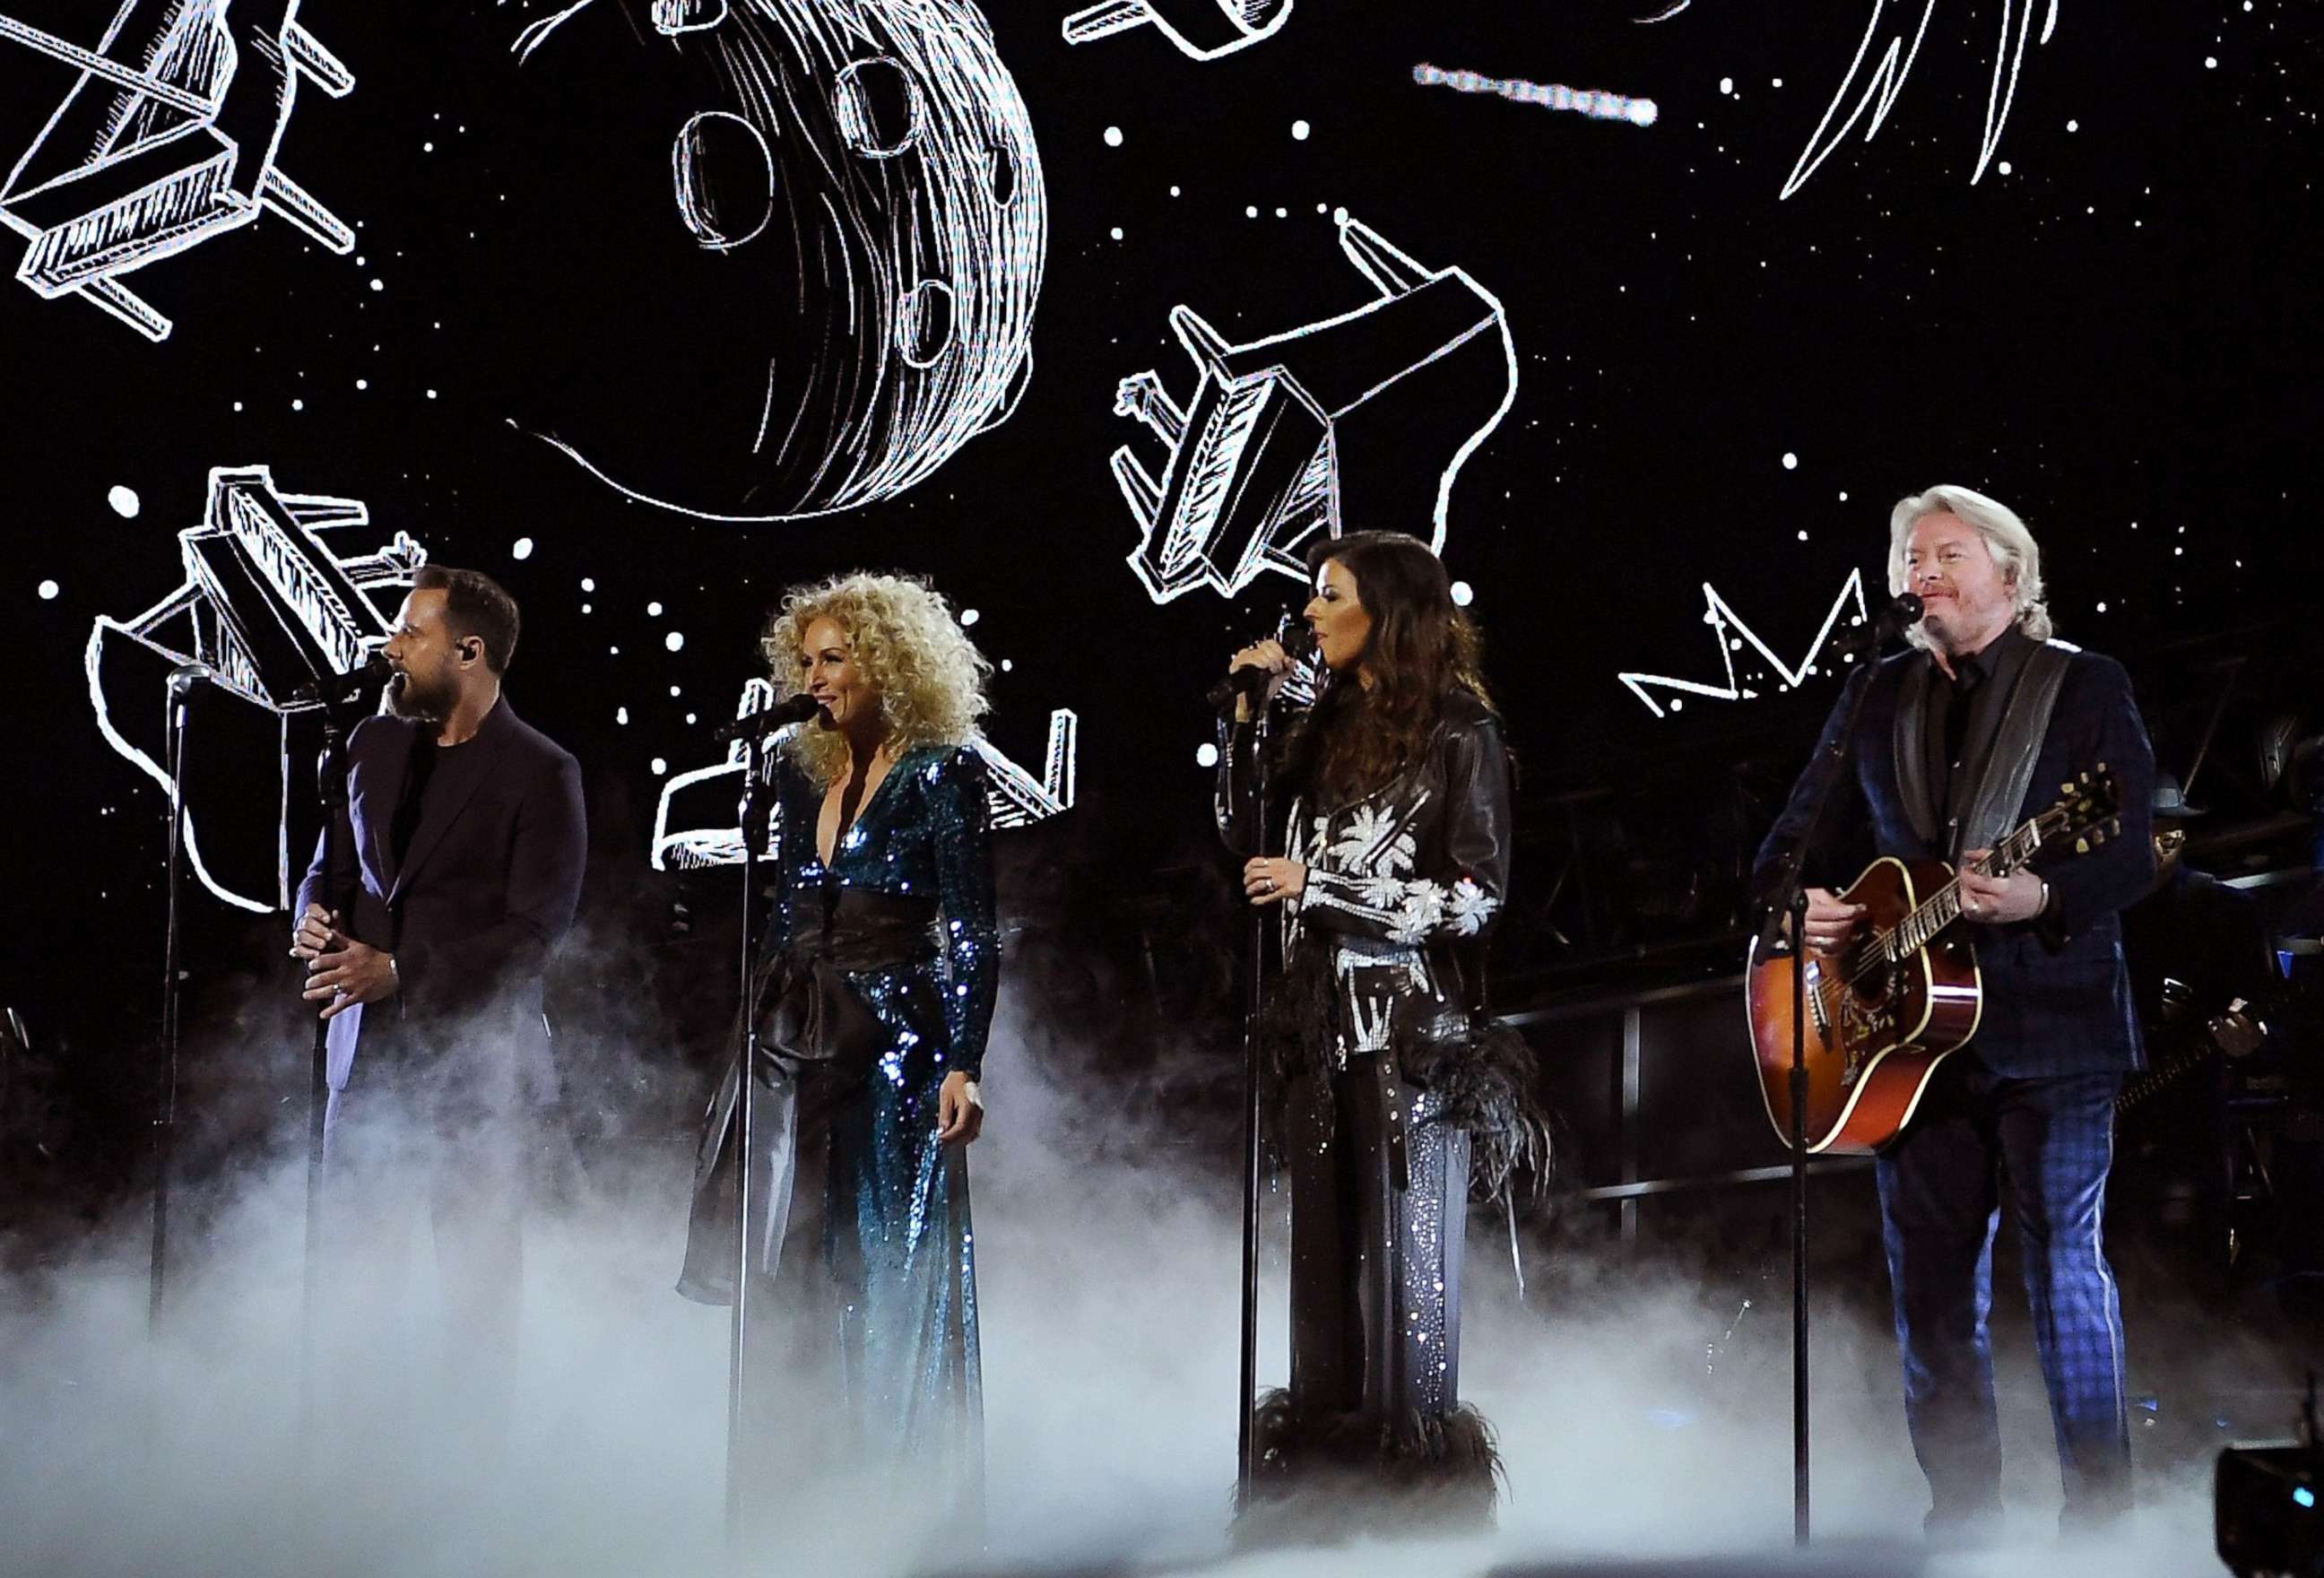 PHOTO: Little Big Town performs at Madison Square Garden in New York City, Jan. 30, 2018.